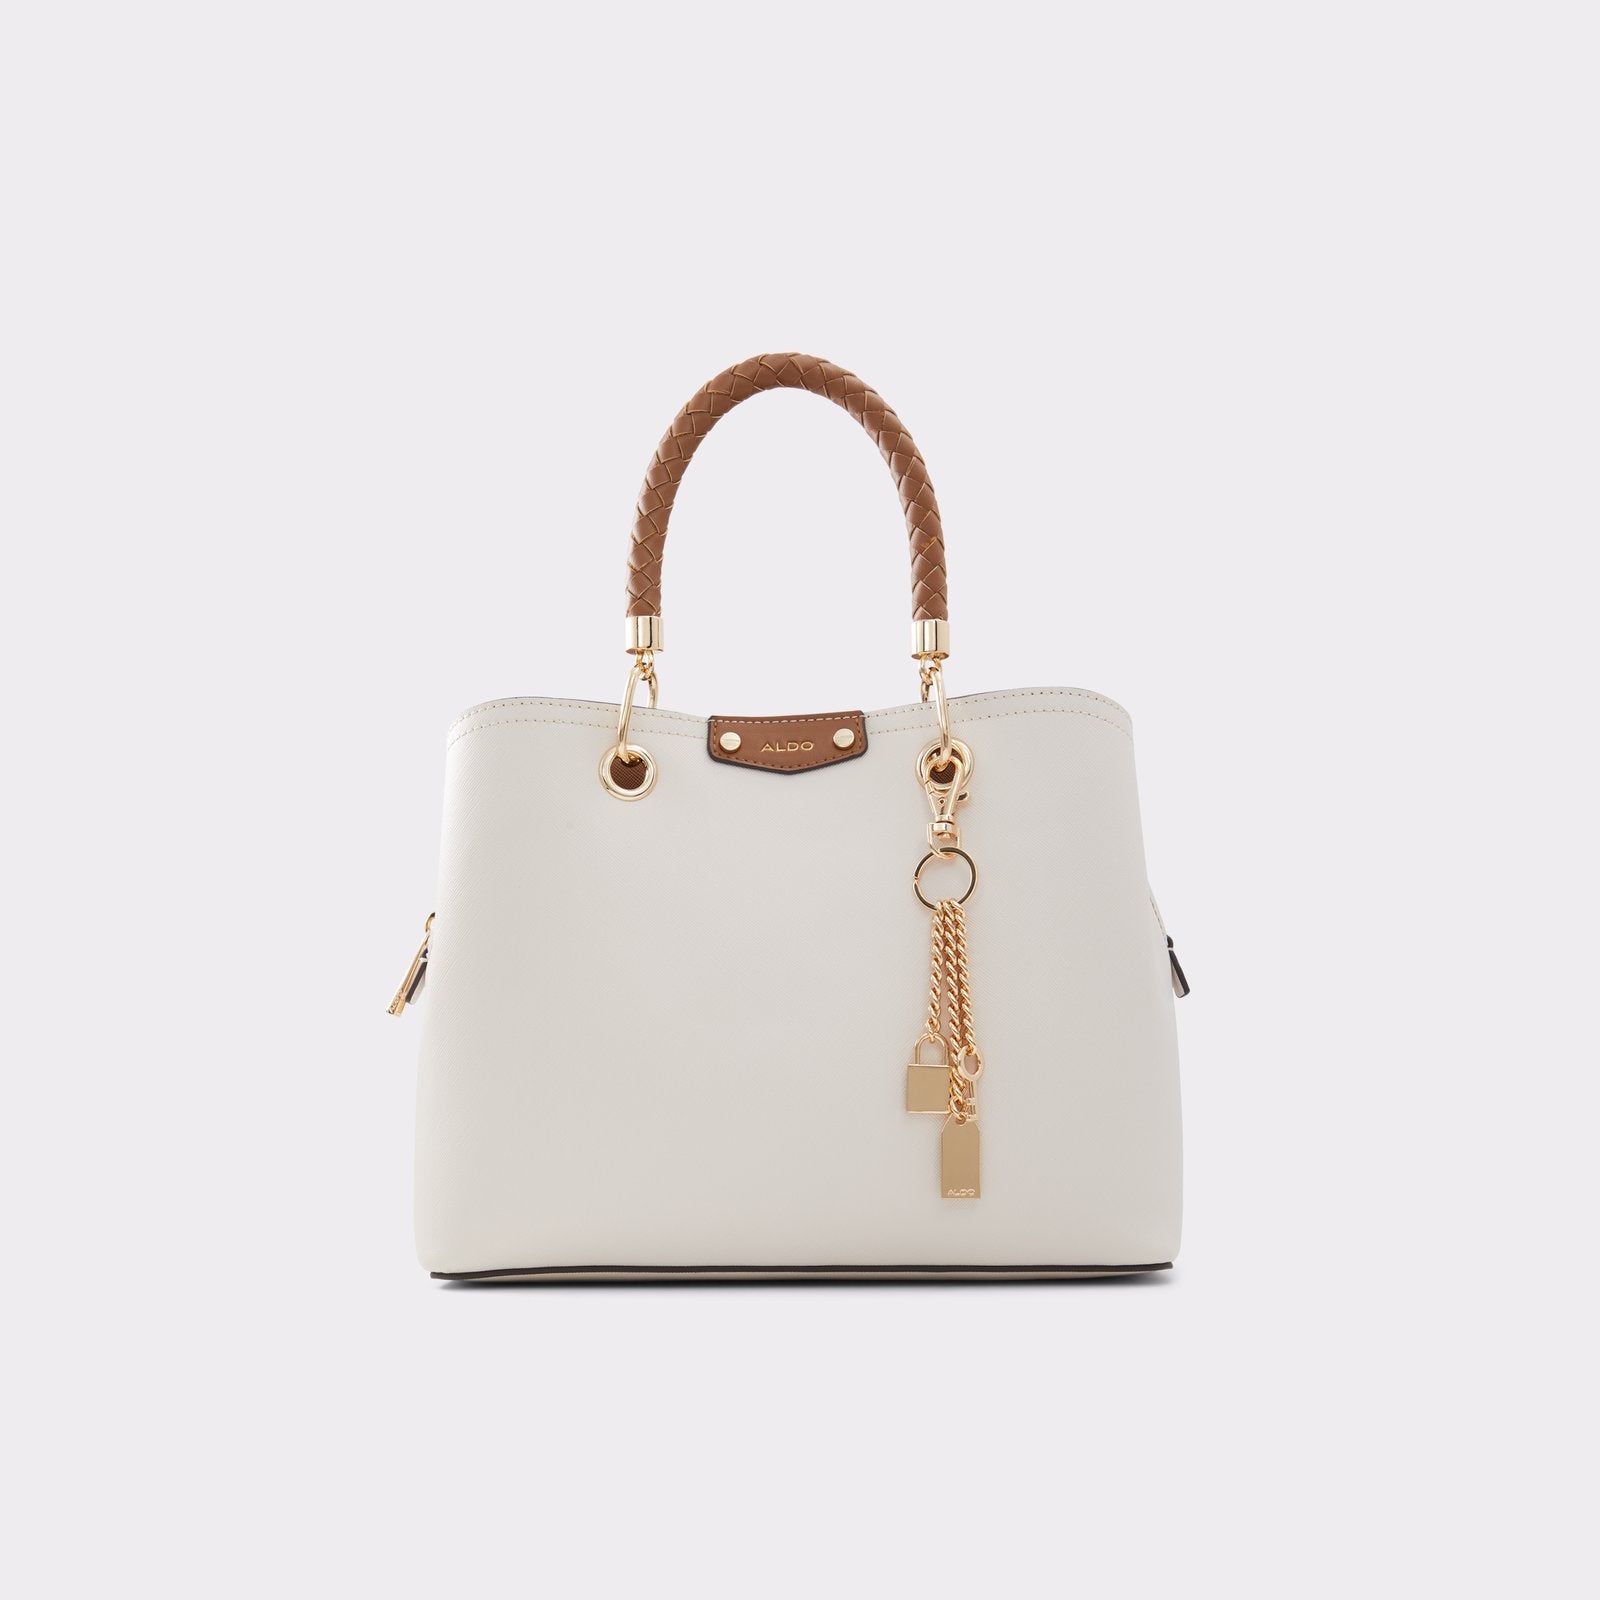 Buy On-The-Go Handbags Collection Online | Aldo Shoes